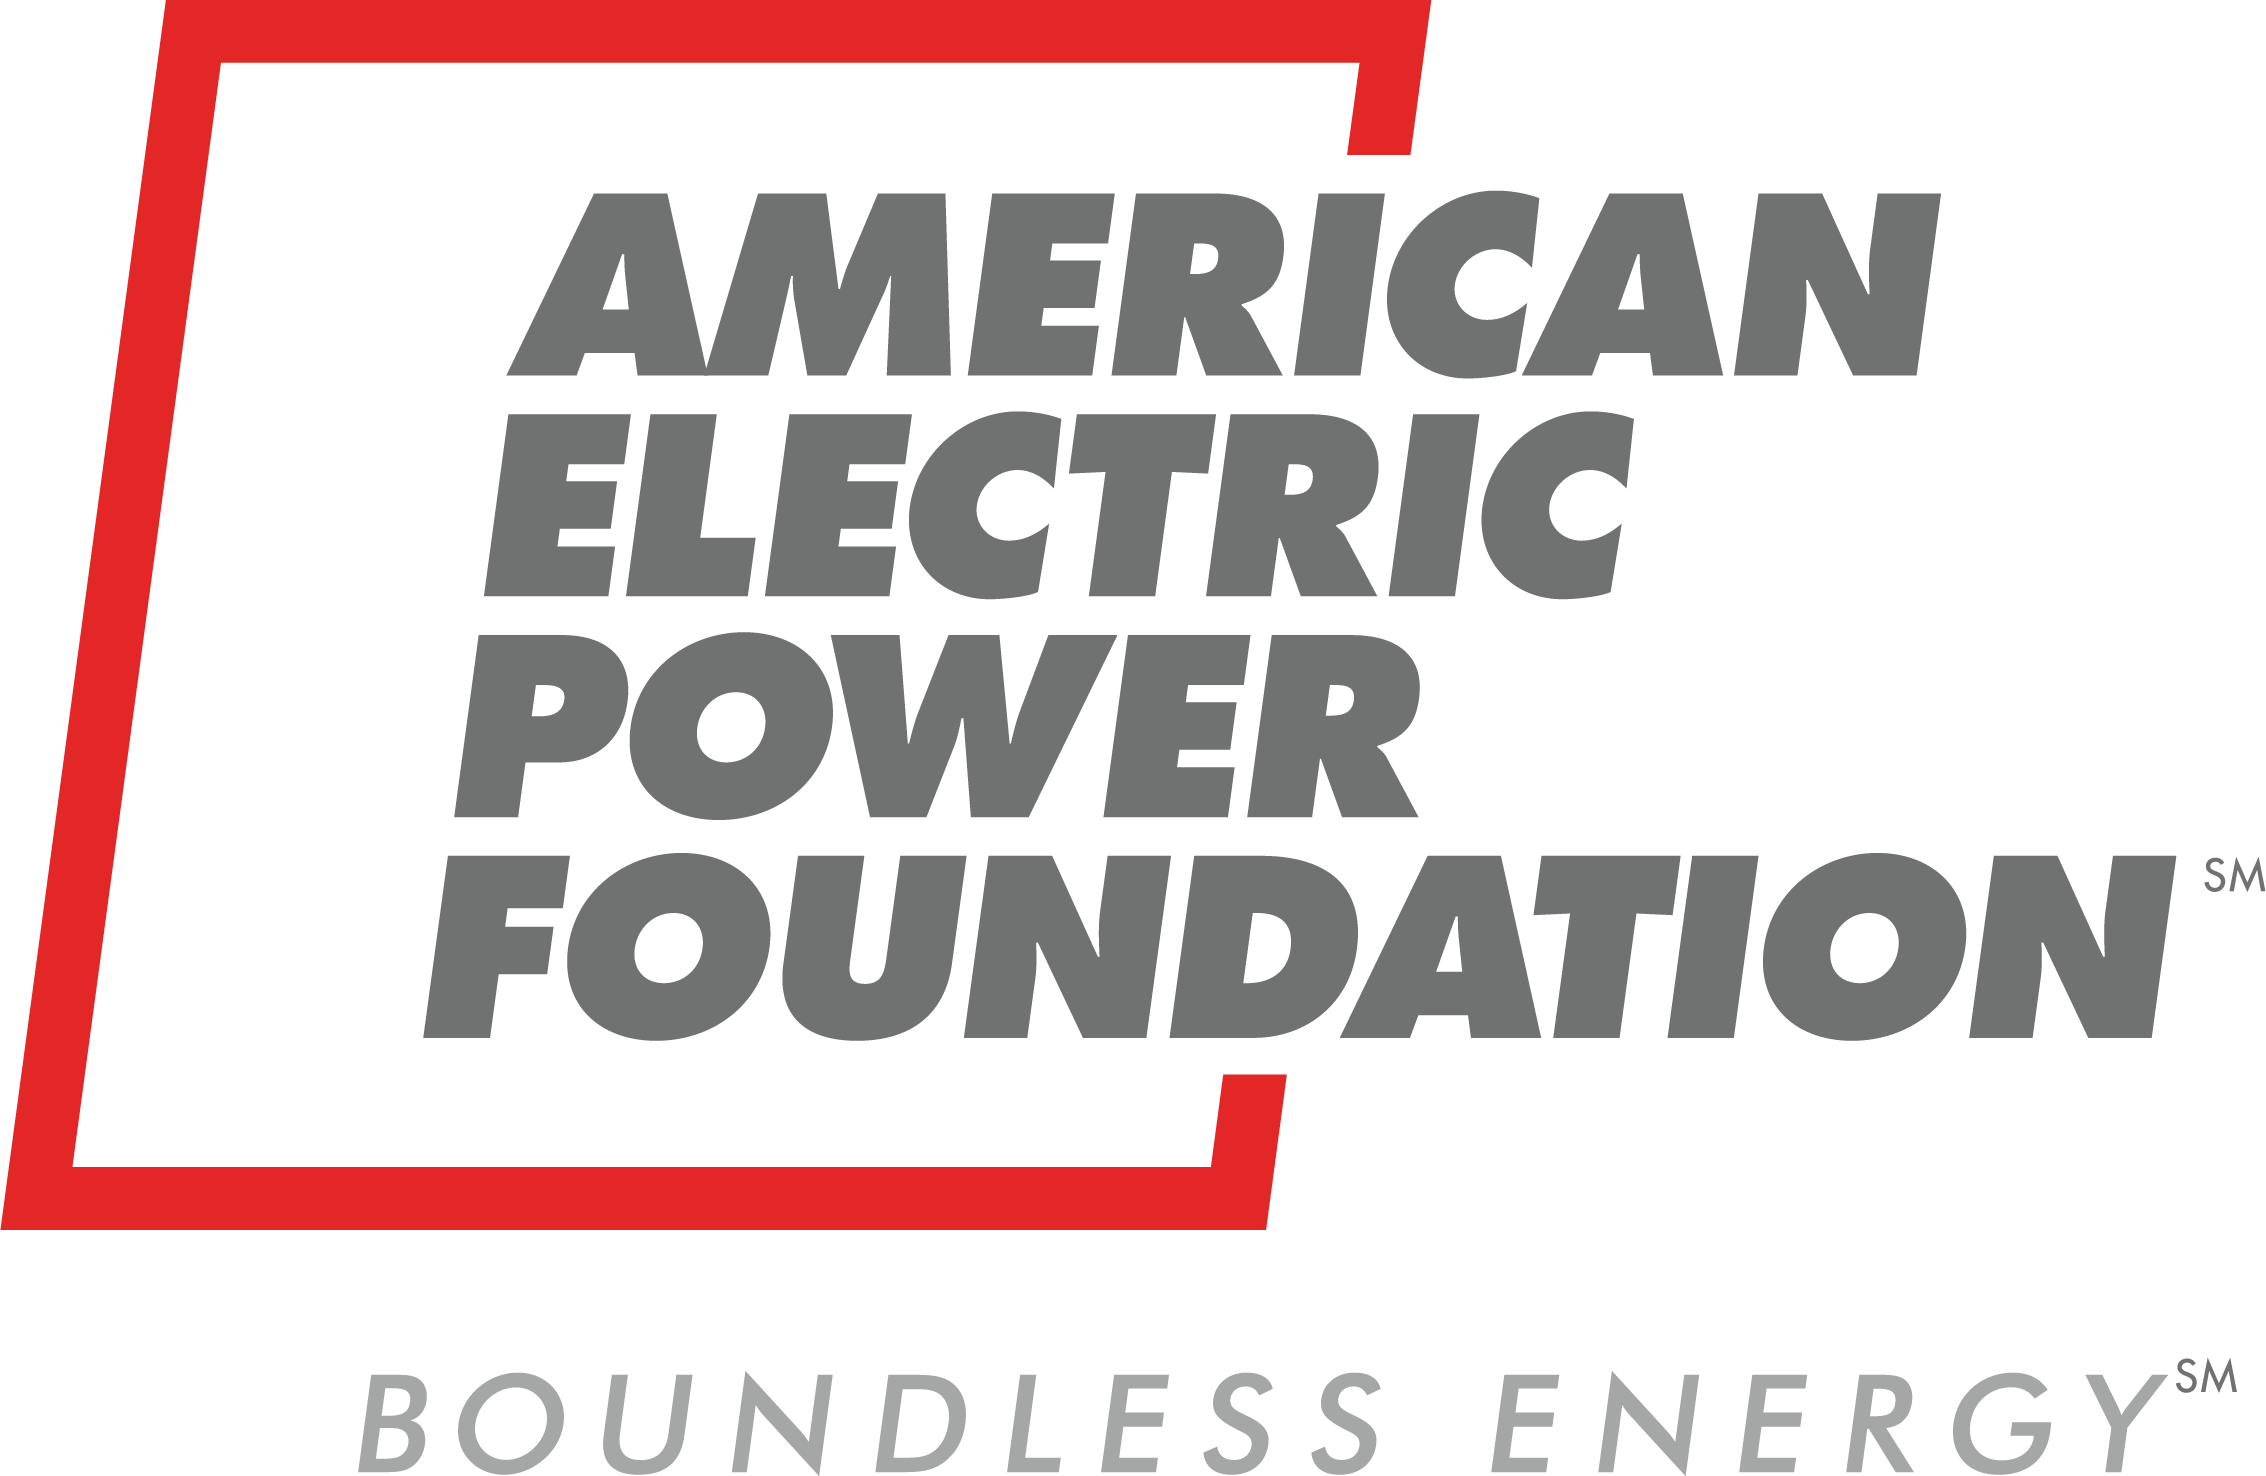 American Electric Power Foundation